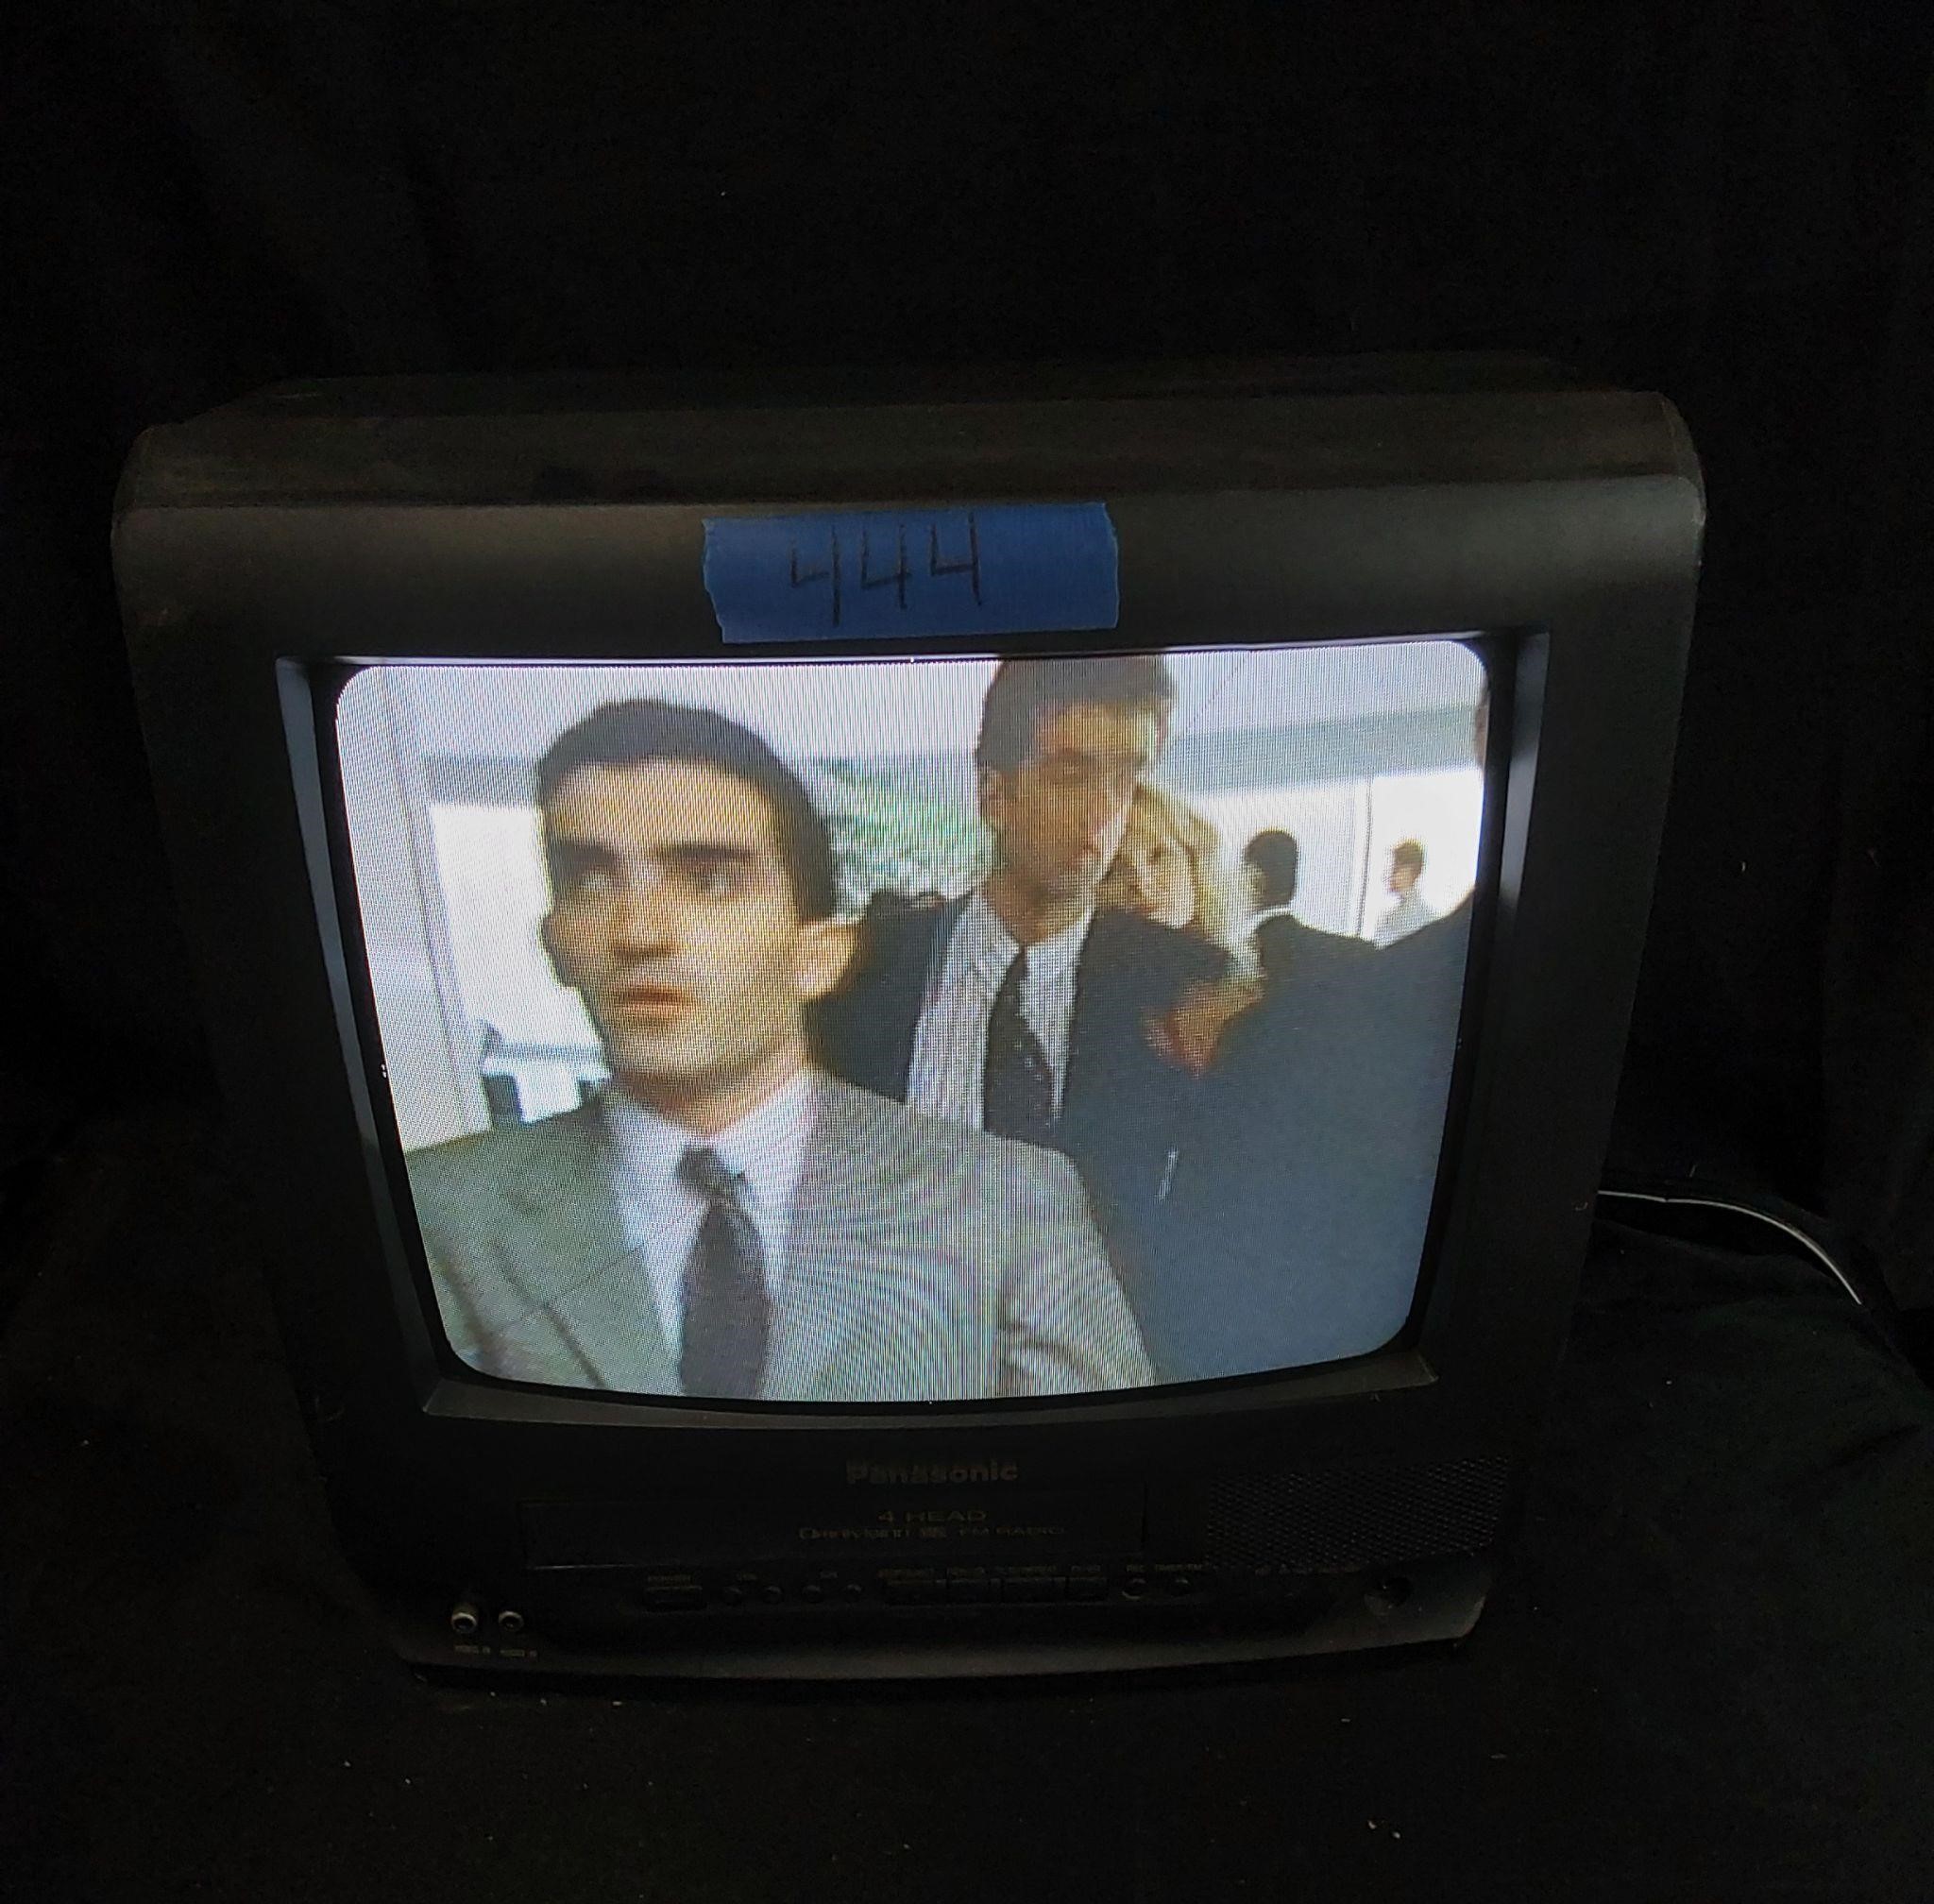 Panasonic TV with attached VHS player